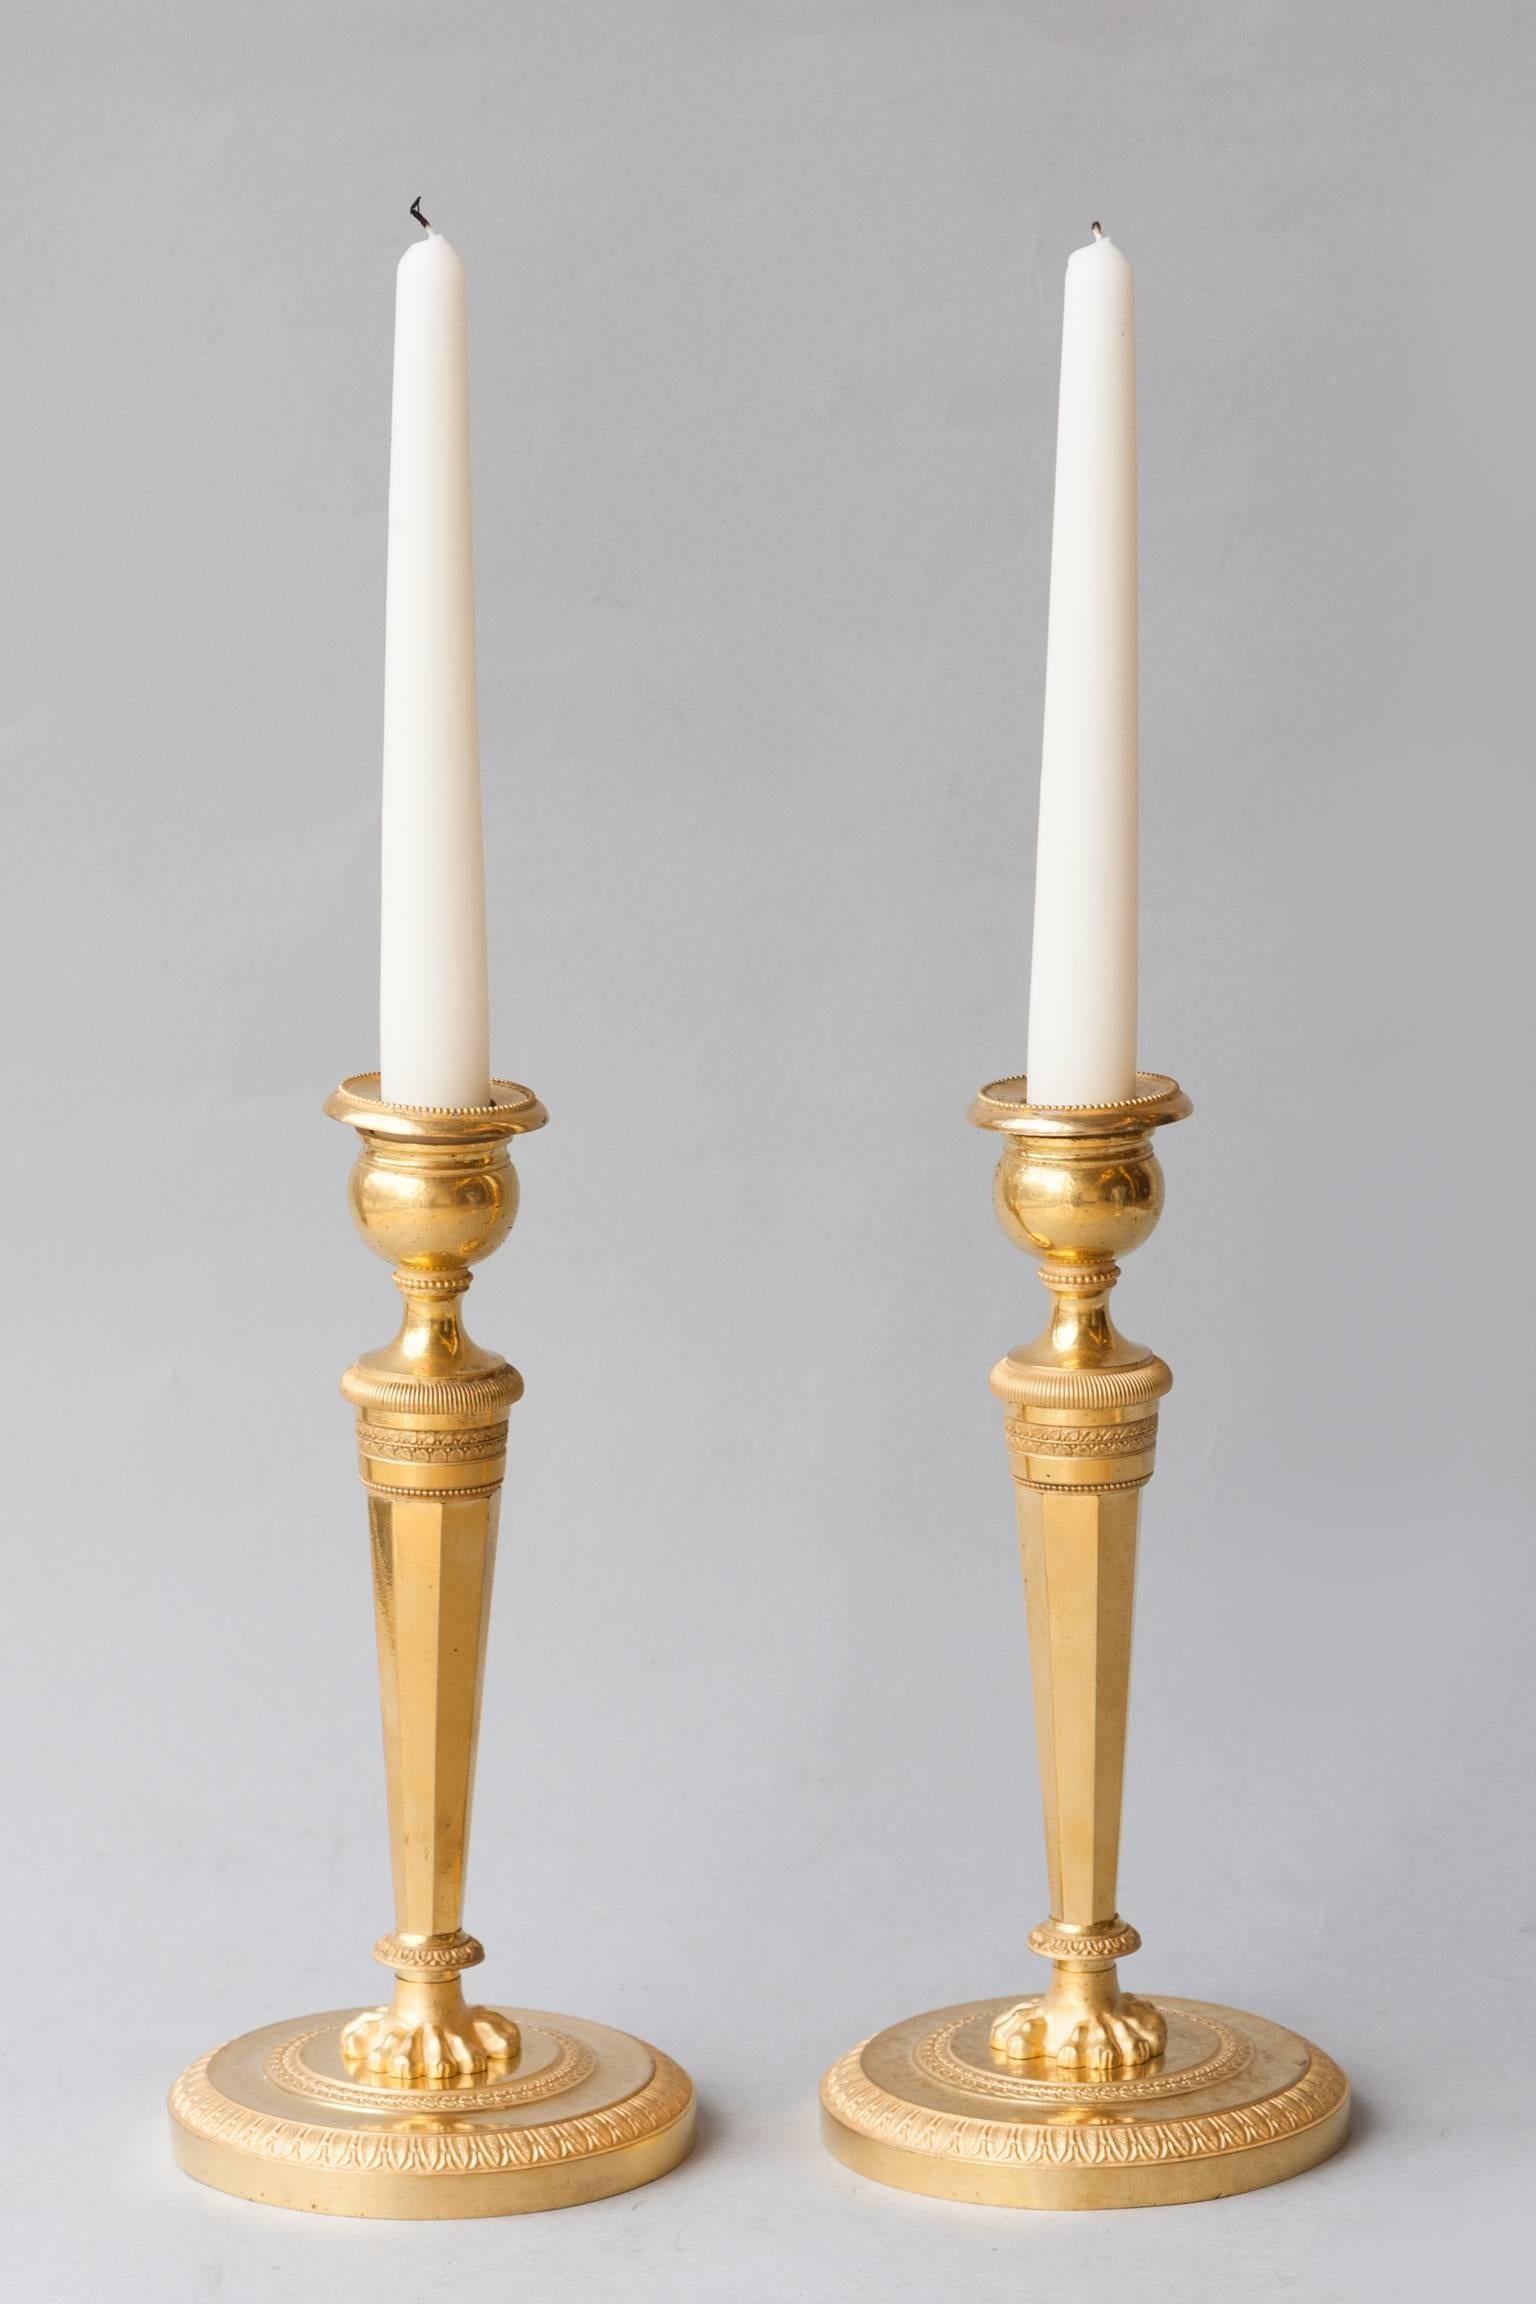 Pair of Fine Quality Early 19th Century Gilt Bronze Candlesticks For Sale 1